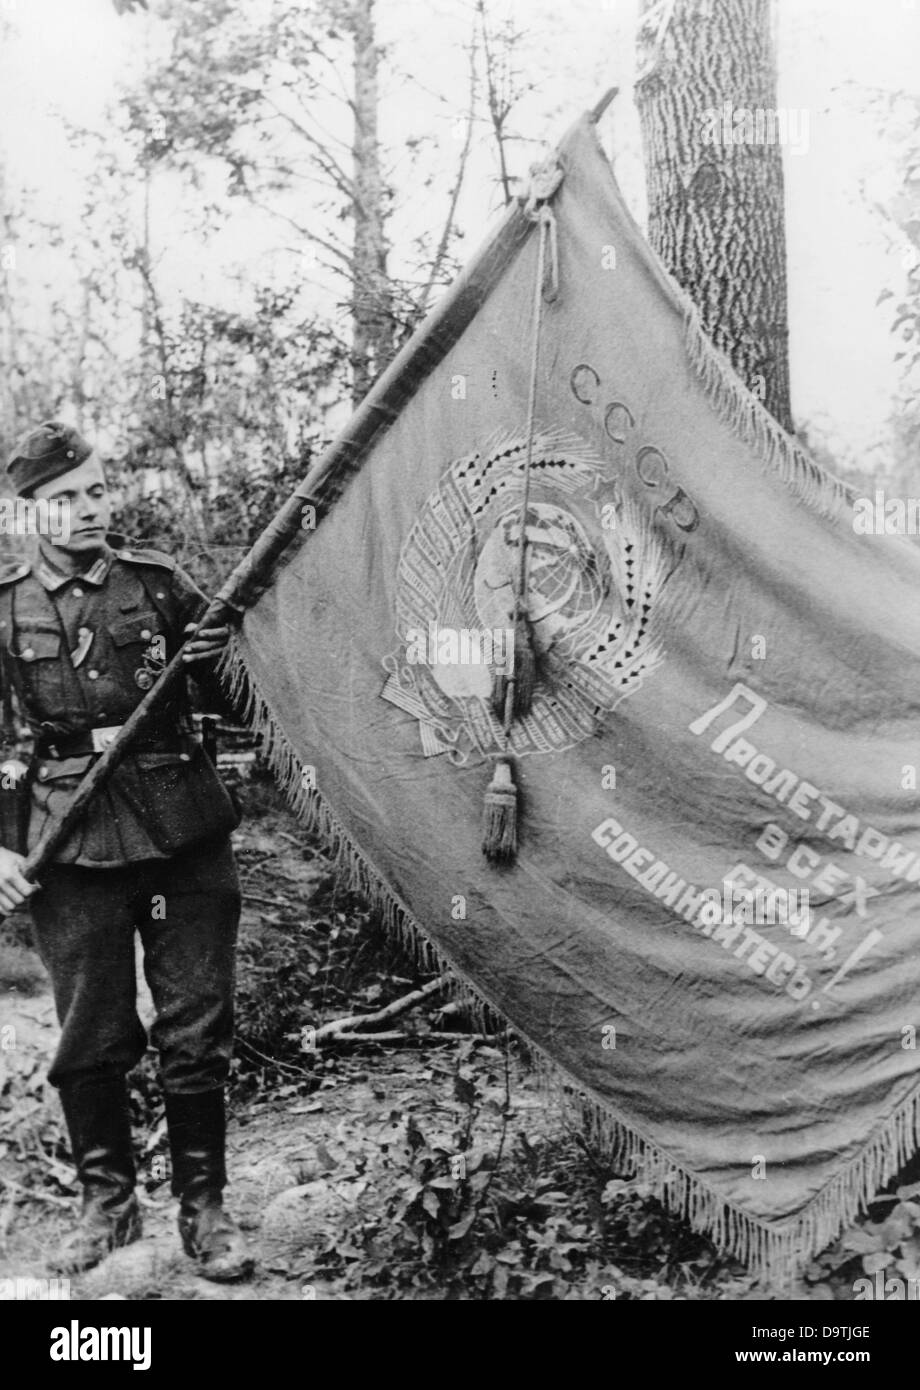 The Nazi Propaganda! on the back of the image reads: 'Spoils of war from Lake Ladoga. During heavy defensive actions in the south of Lake Ladoga, this Soviet flag was captured. 'Proletarians of the world, unite!' is the motto under which its carriers and those who followed them were led to death.' An image from the Eastern Front/Russia, 13 August 1943. The attack on Russia by the German Reich was agreed on in July 1940 and prepared since December 1940 as the 'Operation Barbarossa'. On 22 June 1941, the invasion of the Soviet Union by the German Wehrmacht started. Fotoarchiv für Zeitgeschichte Stock Photo